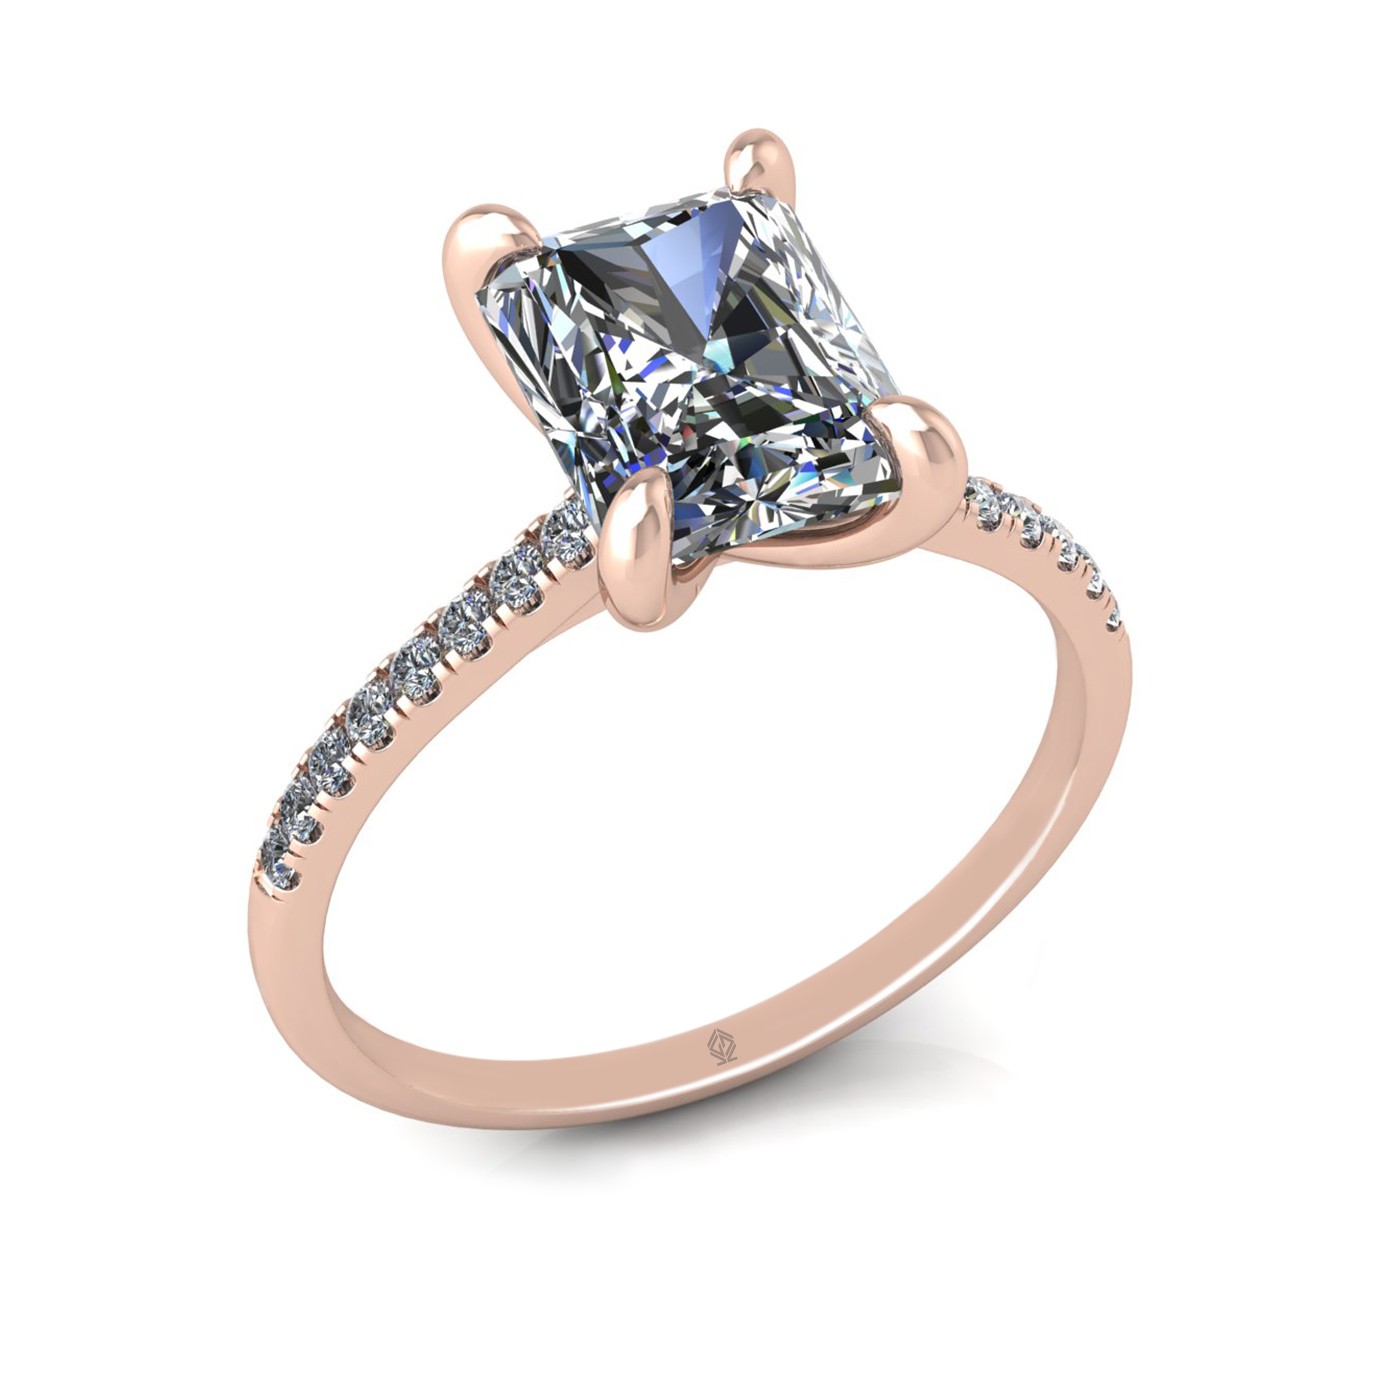 18k rose gold  2,50 ct 4 prongs radiant cut diamond engagement ring with whisper thin pavÉ set band